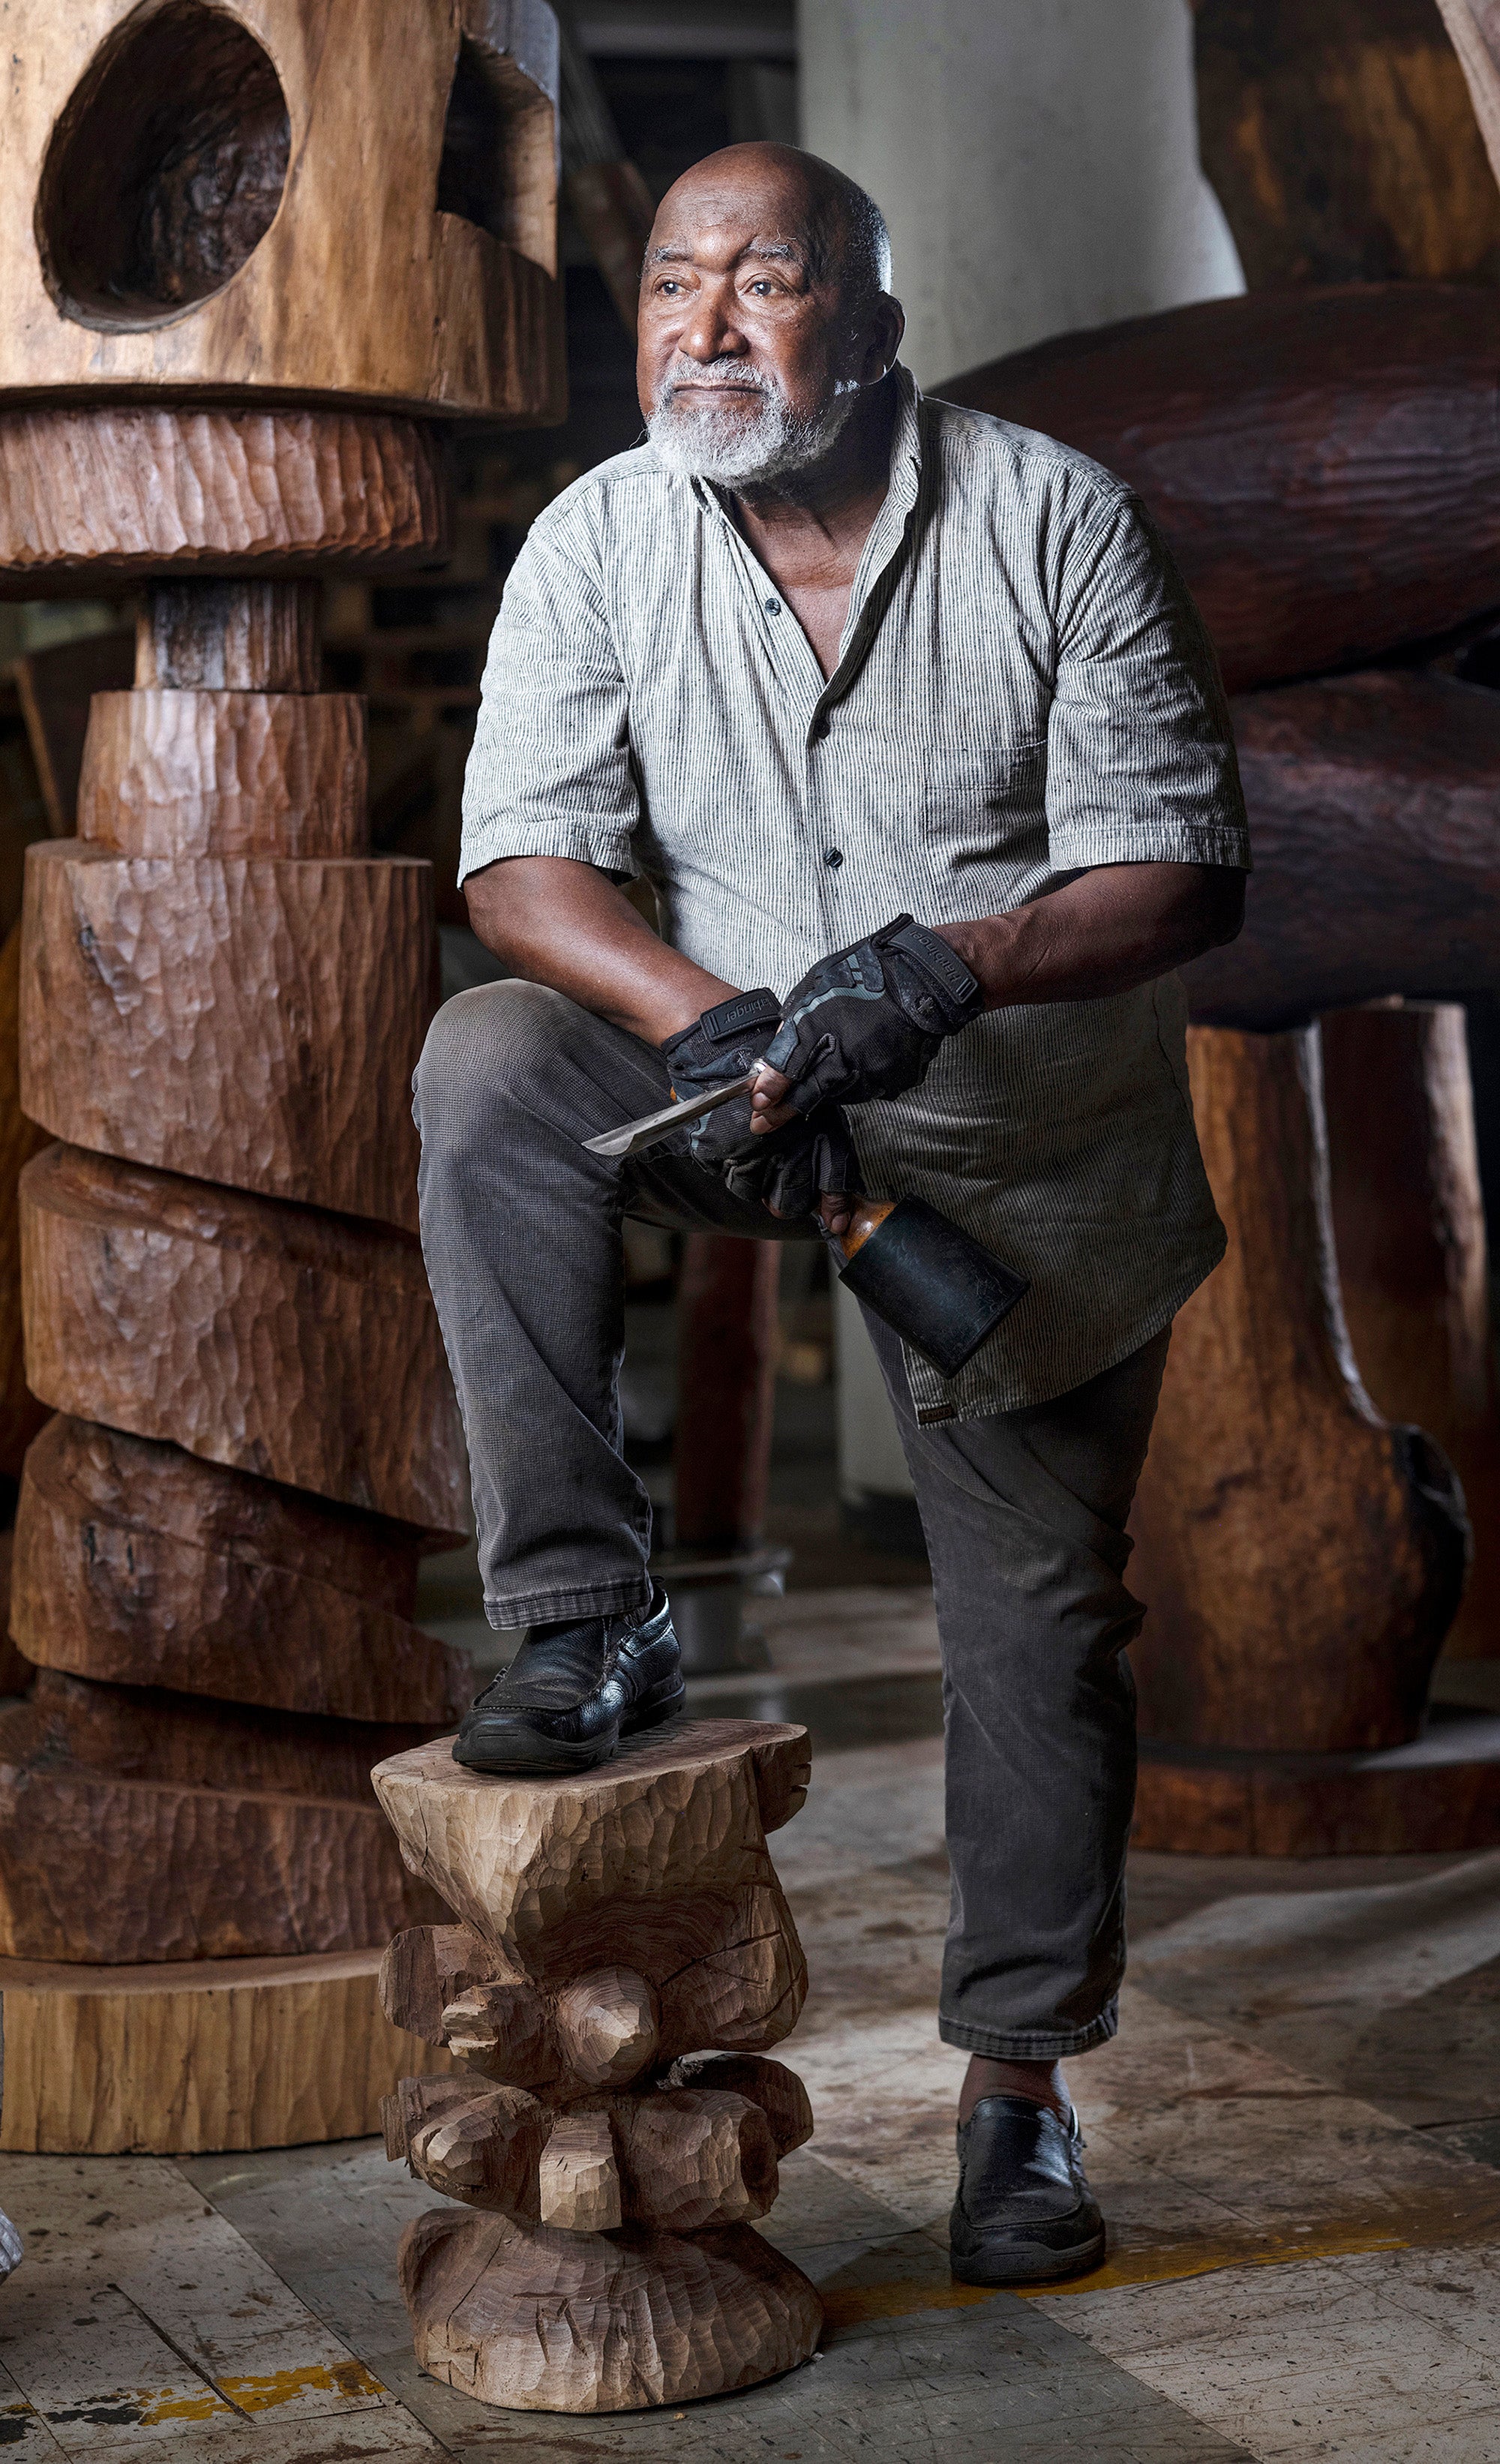 A man stands with his right foot on a wooden sculpture